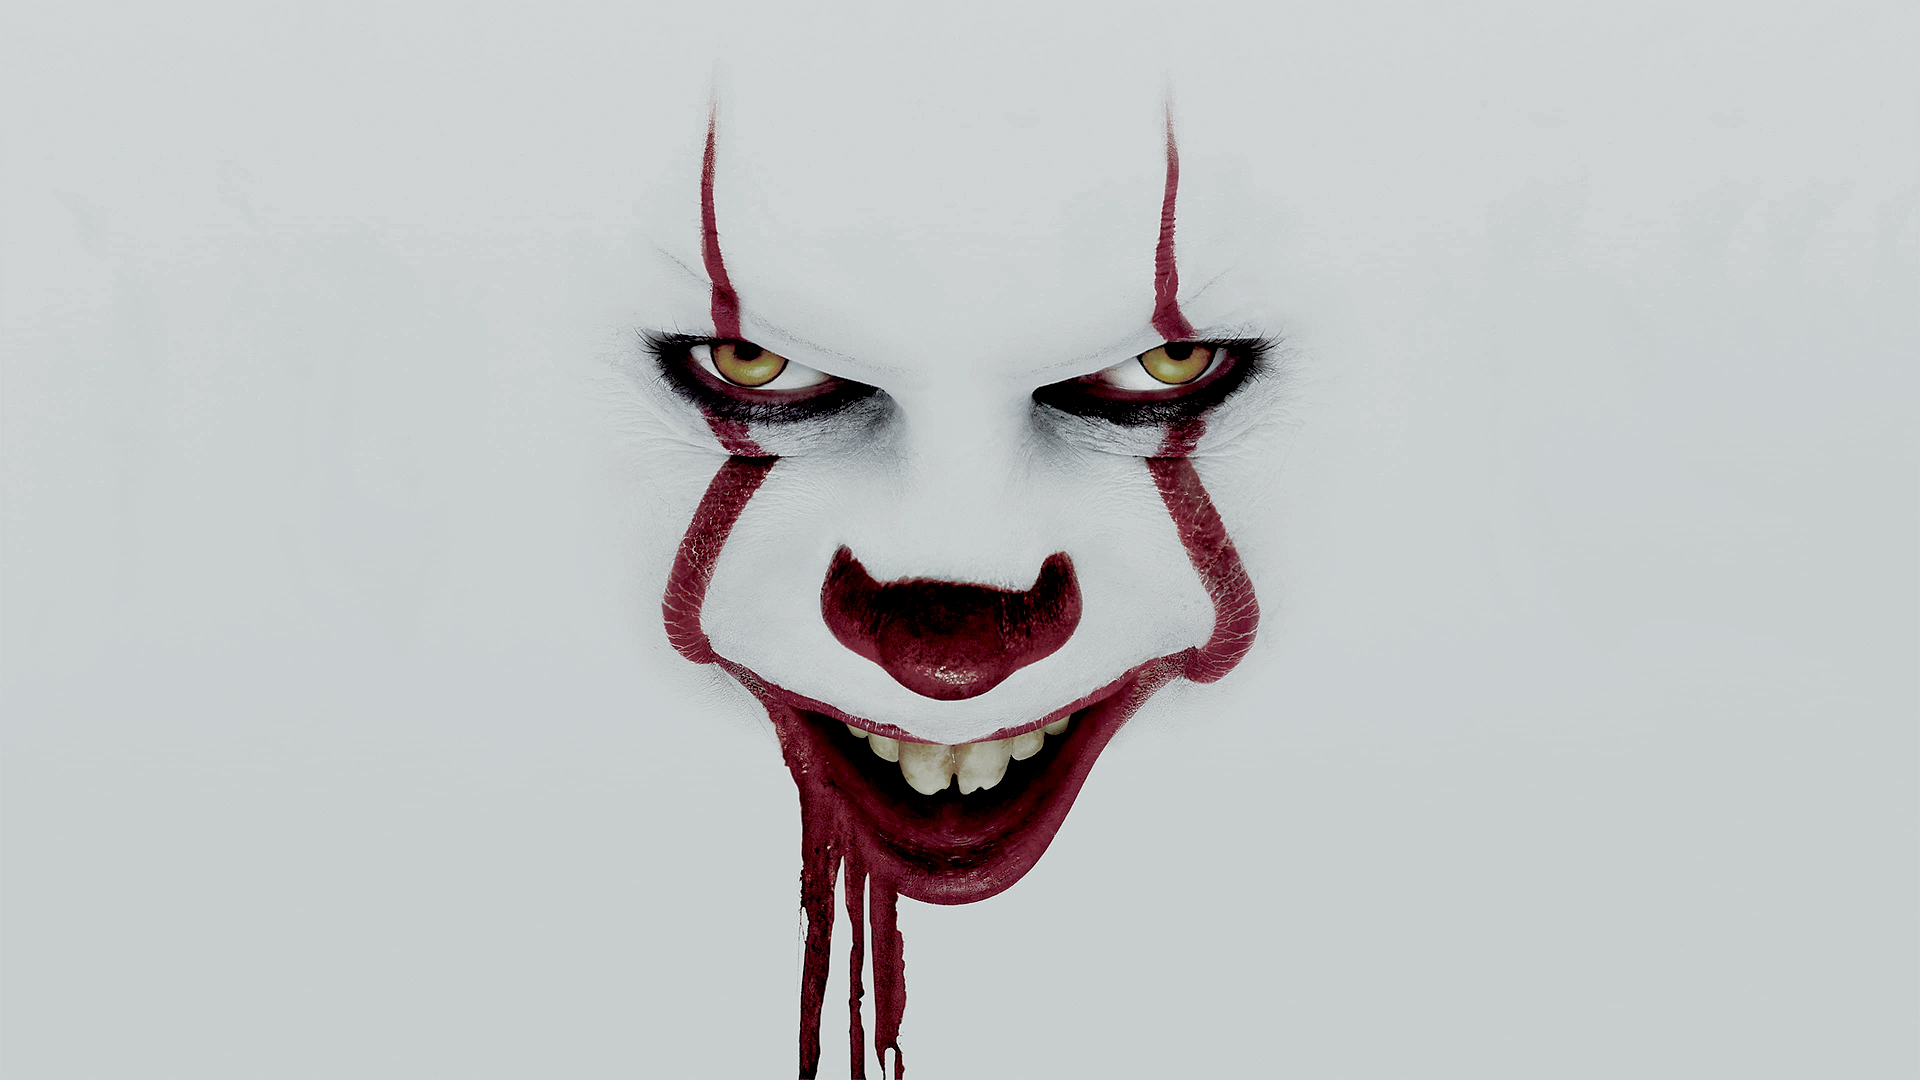 It Chapter Two Wallpaper - Pennywise - Stephen King's IT Wallpaper ...